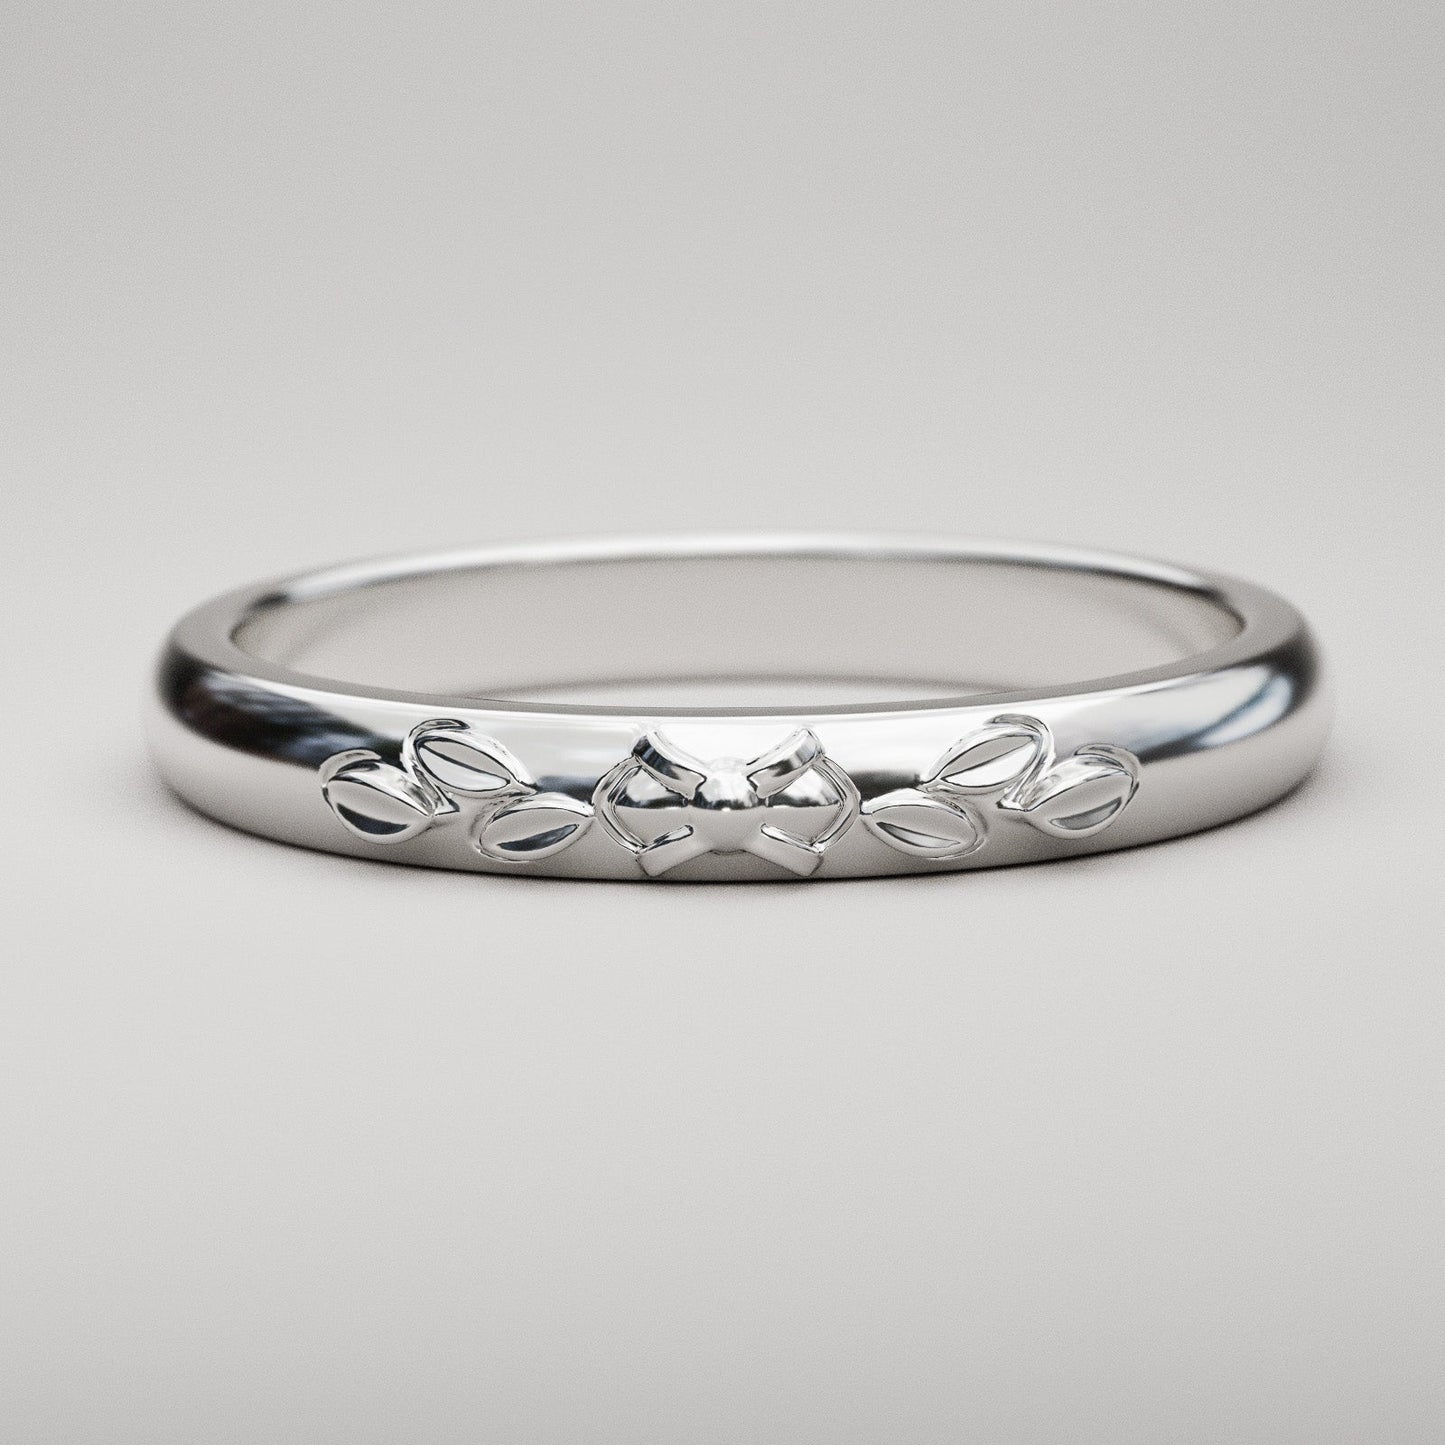 Leaf design wedding band with classic vintage styling for woman in white gold